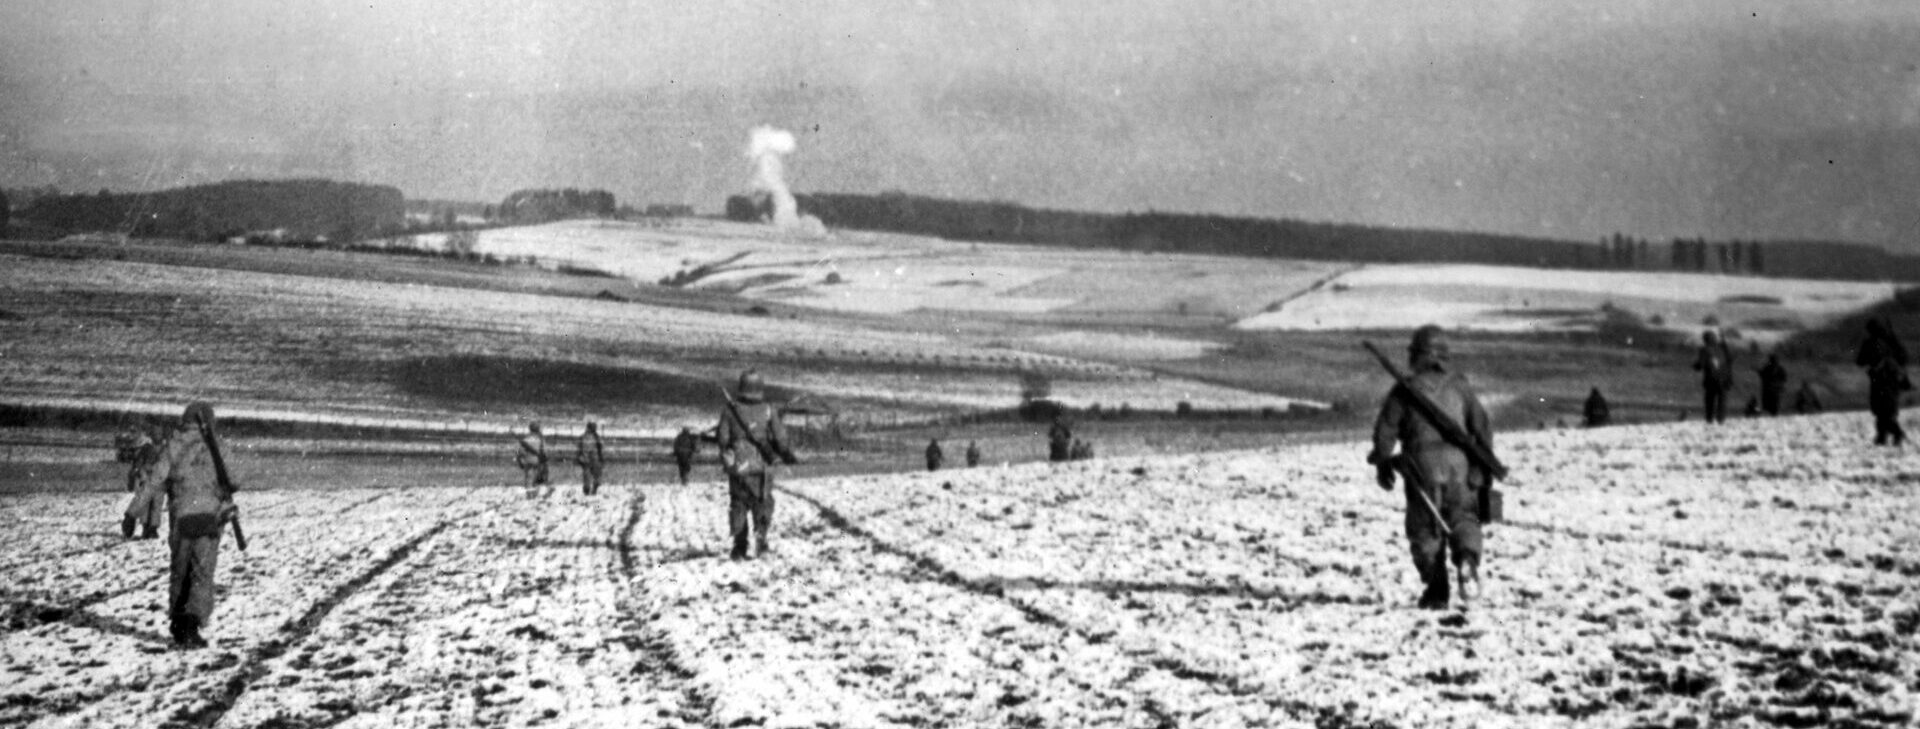 Soldiers of the 10th Armored Infantry cross a snowy field during the advance on Bastogne. A column of smoke reveals an air strike or artillery fire against the defending Germans. 